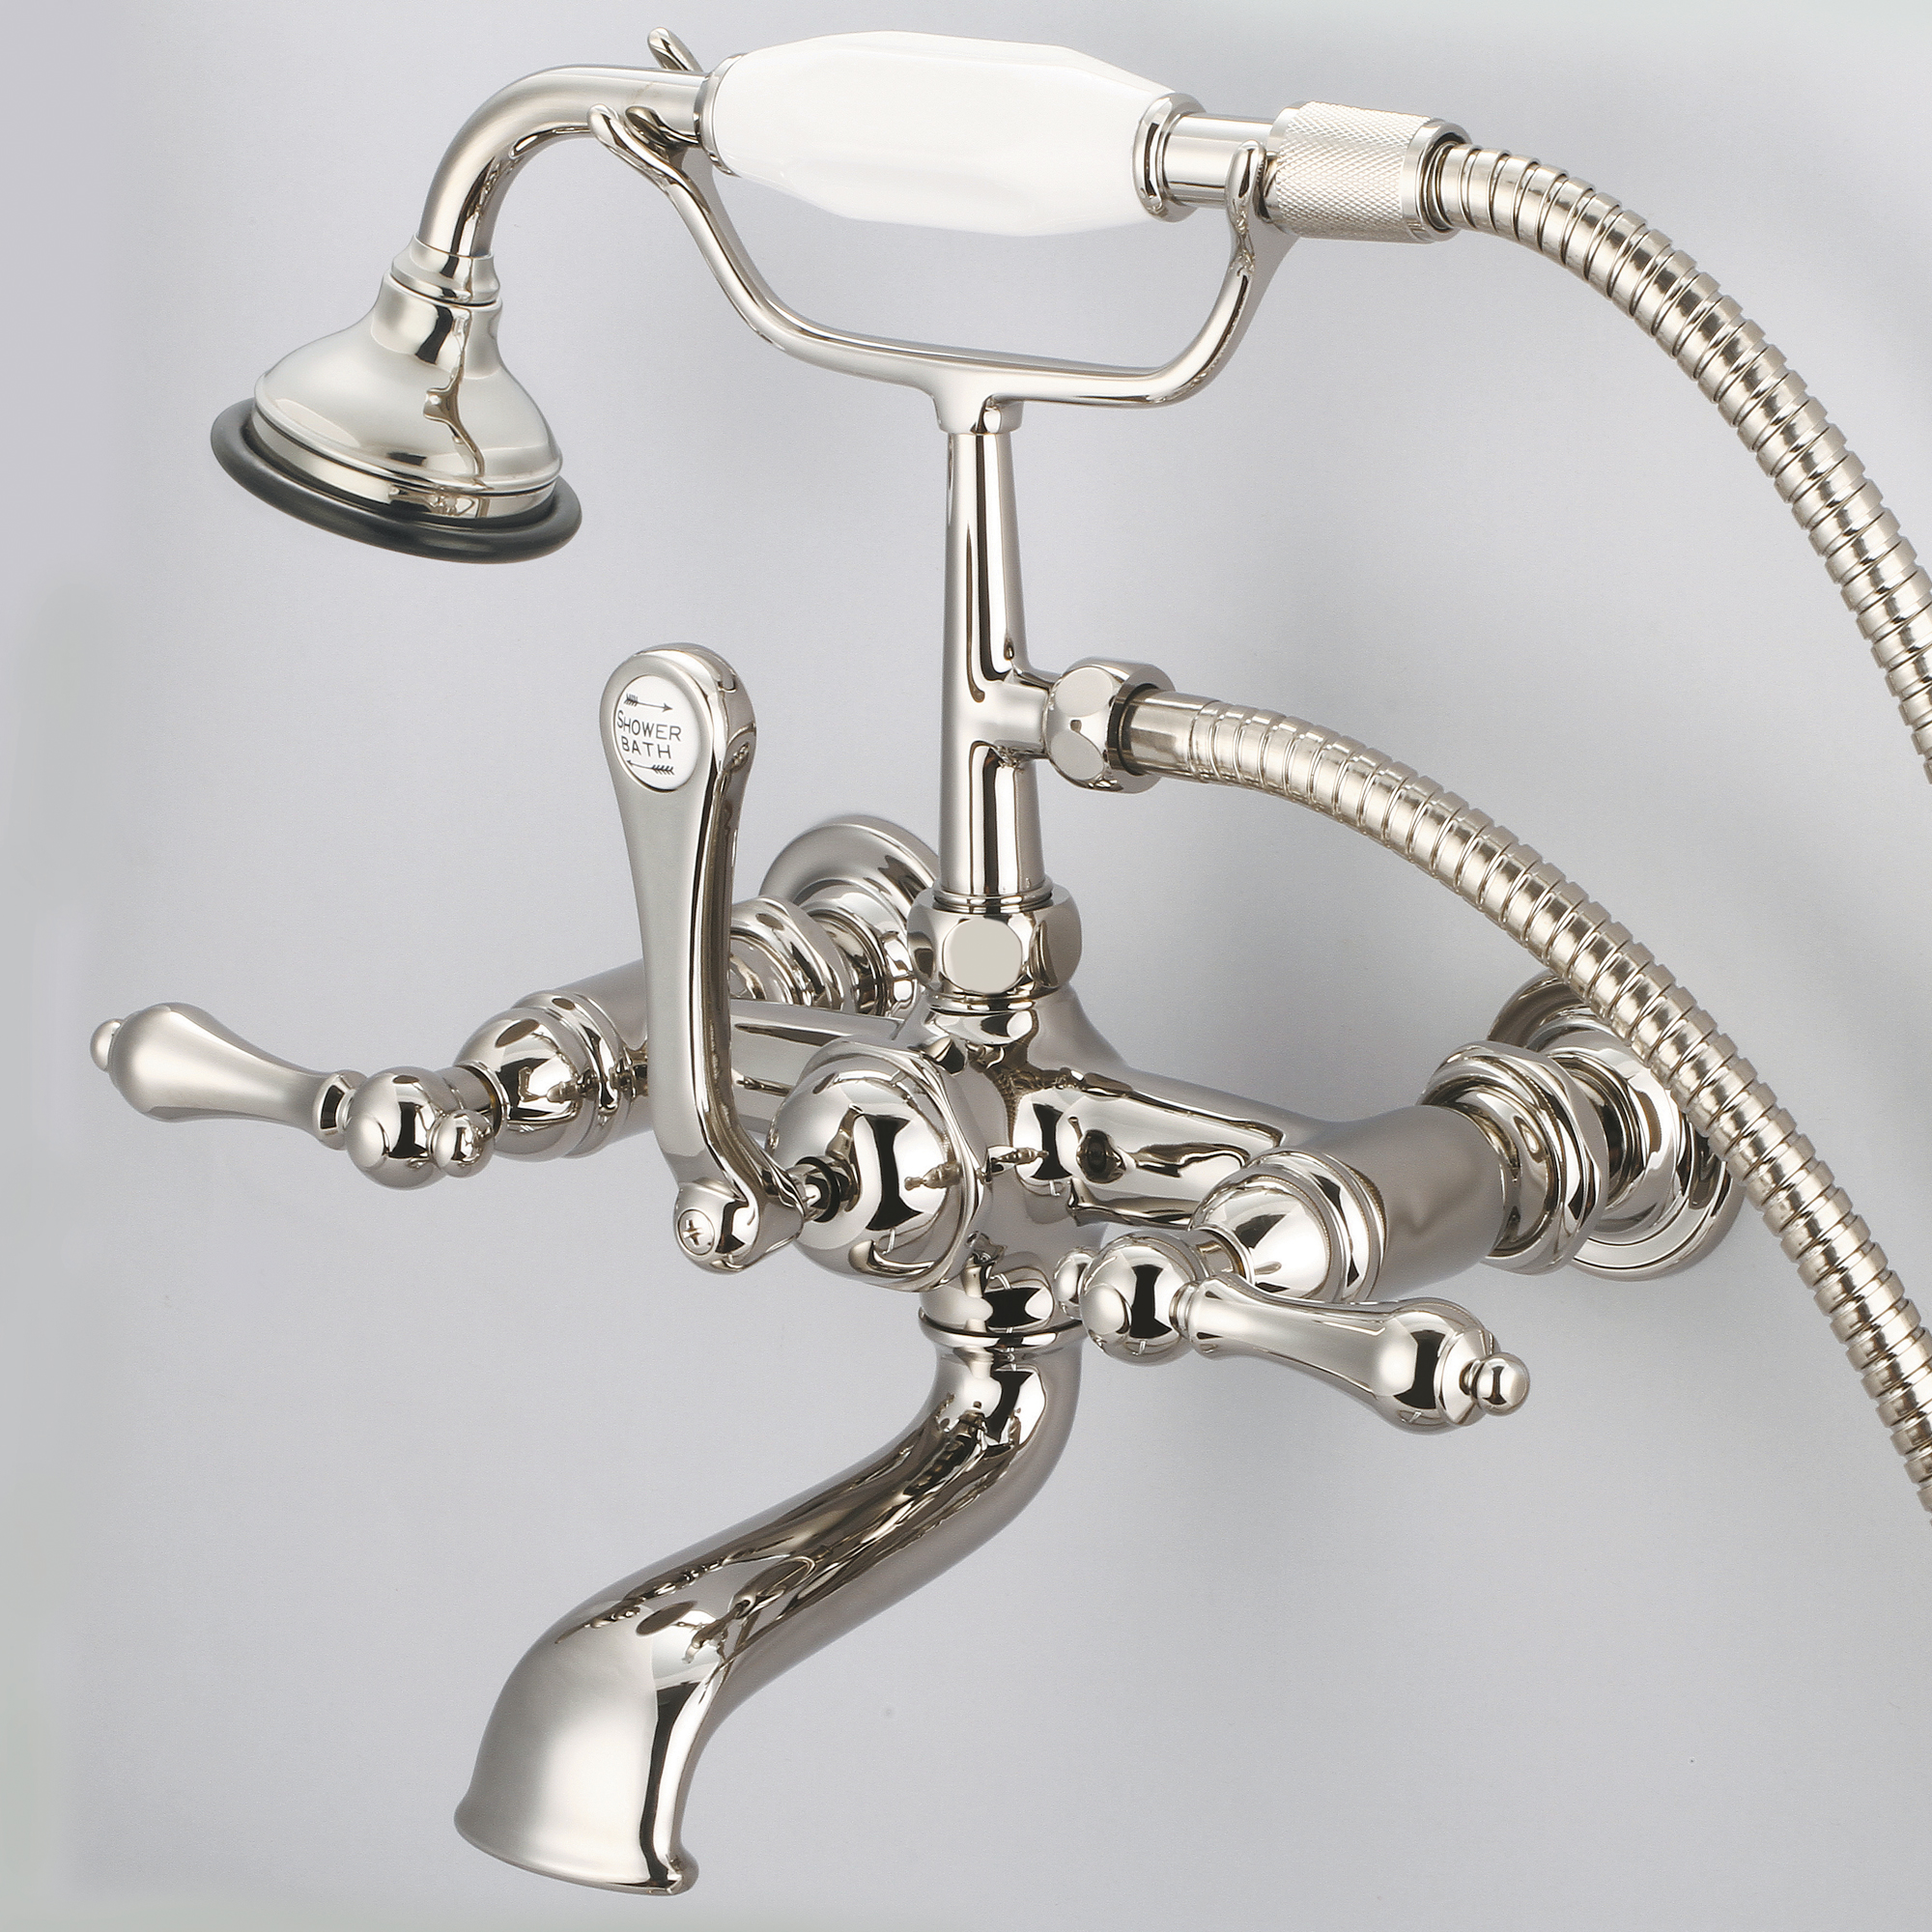 Vintage Classic 7 Inch Spread Wall Mount Tub Faucet With Straight Wall Connector & Handheld Shower in Polished Nickel (PVD) Finish With Metal Lever Handles Without Labels